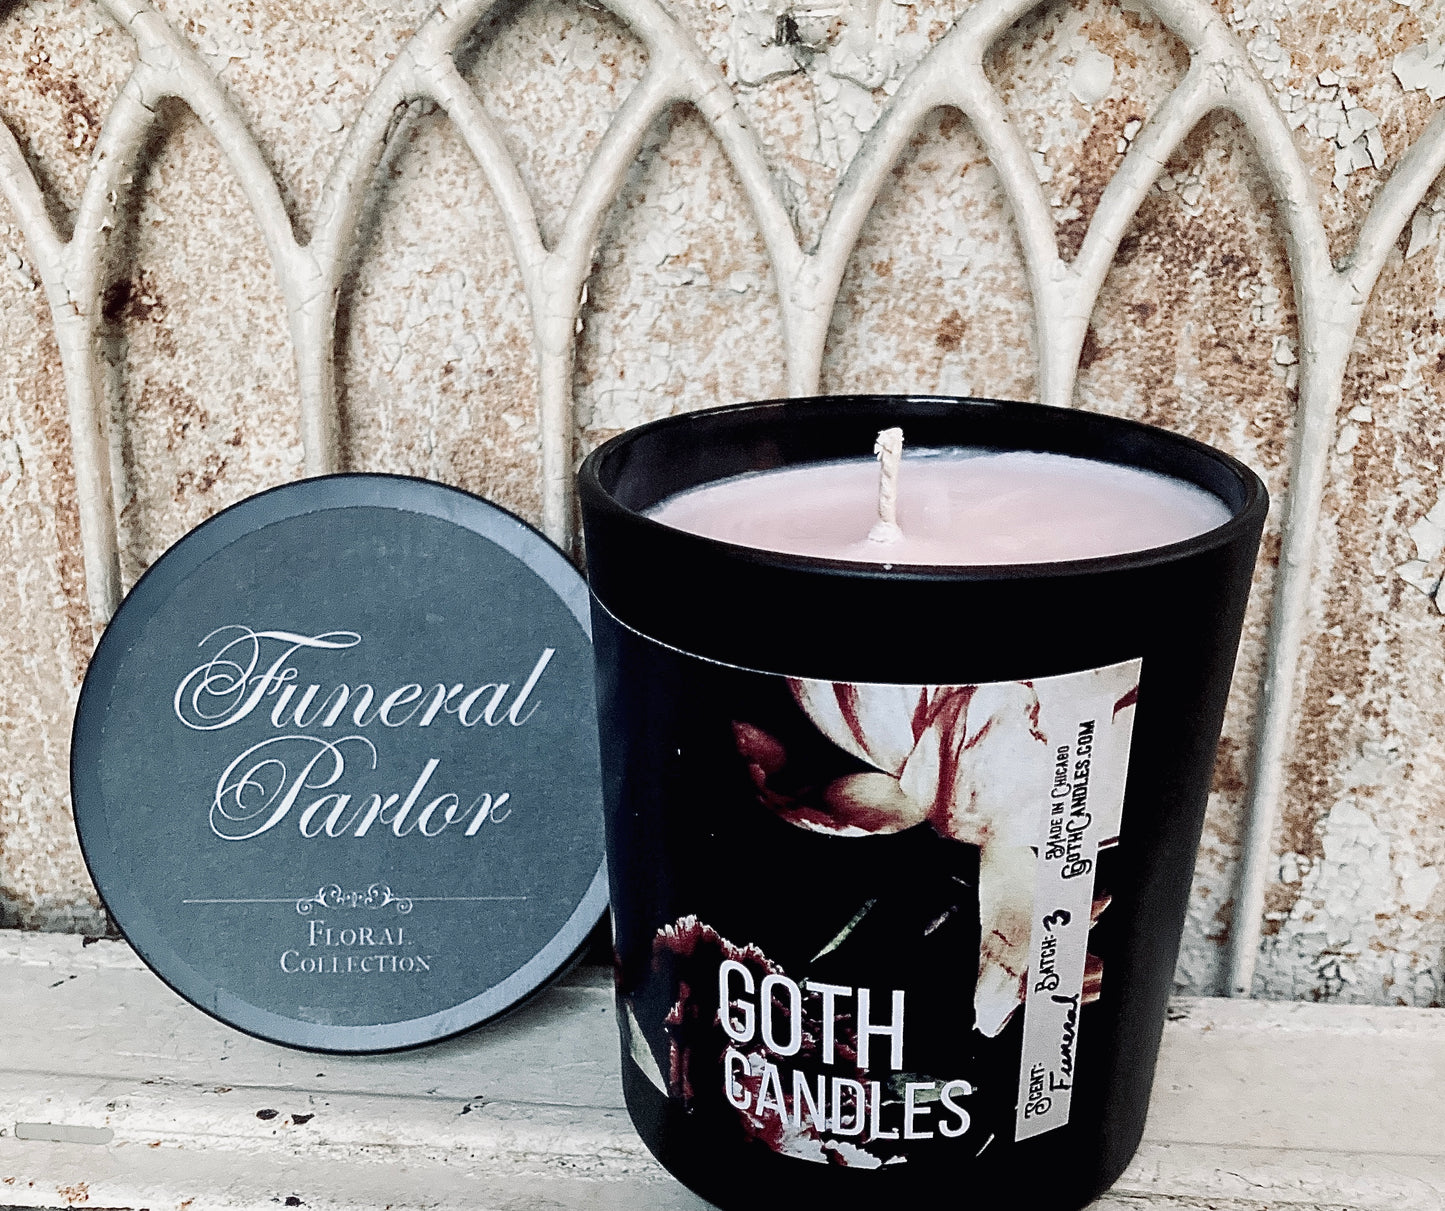 Fresh Rose Scent | FUNERAL | Funeral Parlor Collection | Goth Candles | Soy Wax 10oz Vessel